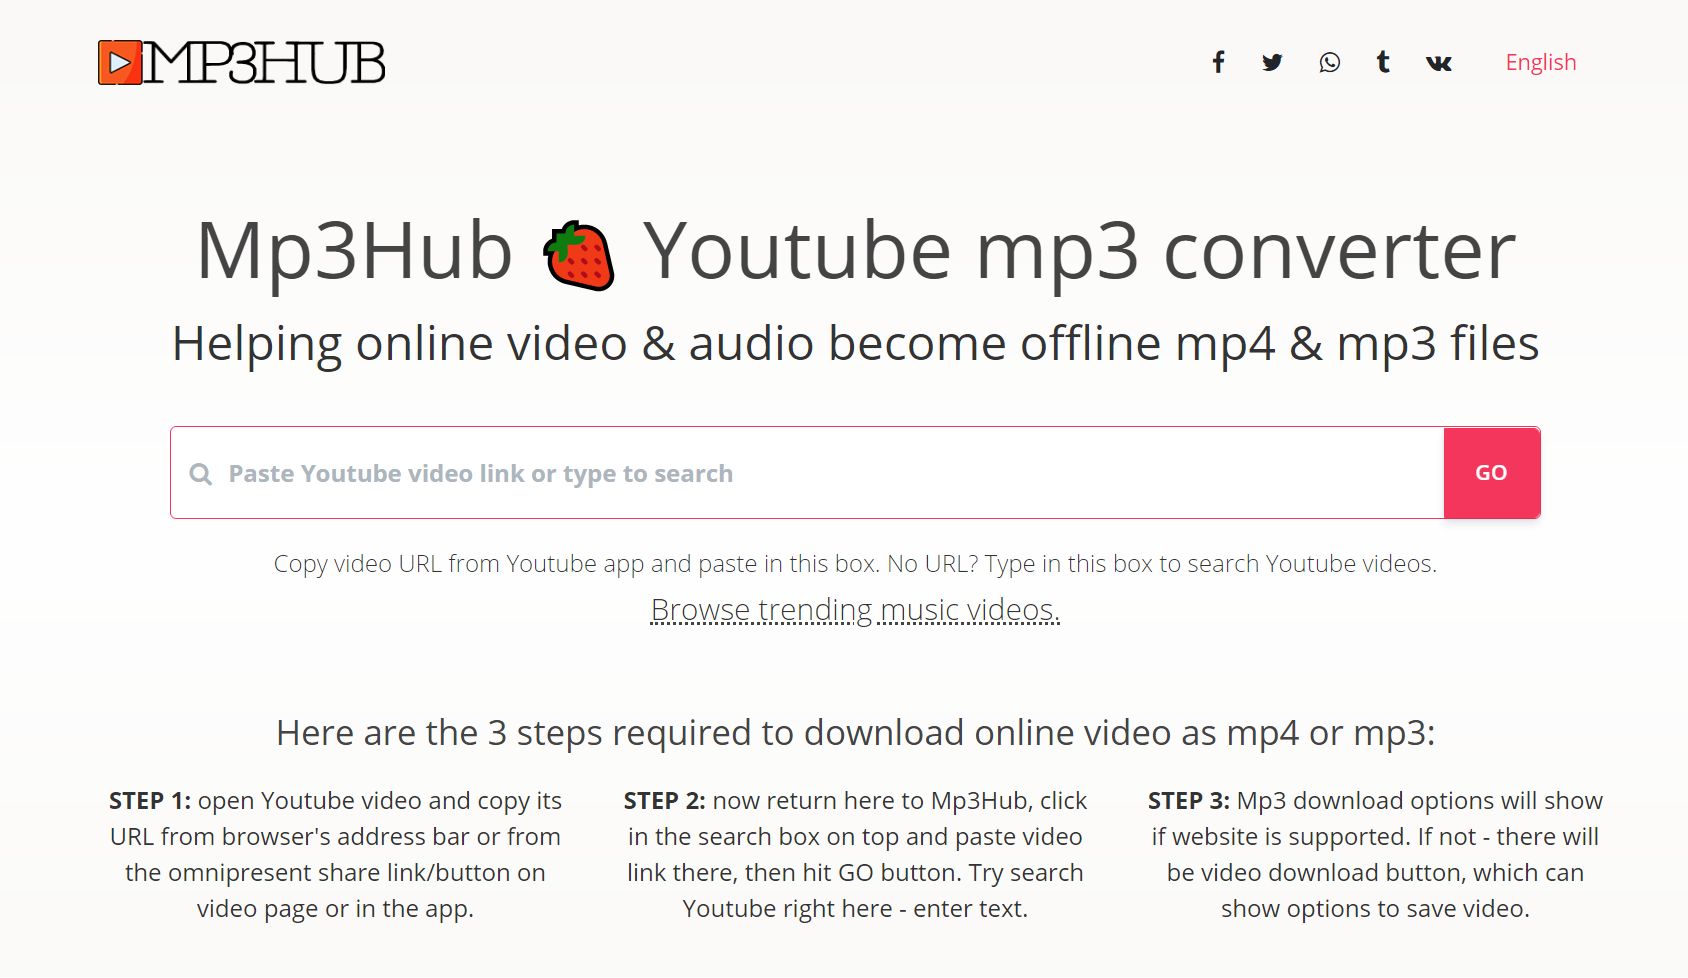 to MP3 320 Kbps Y2mate and Other Top 5 Alternatives